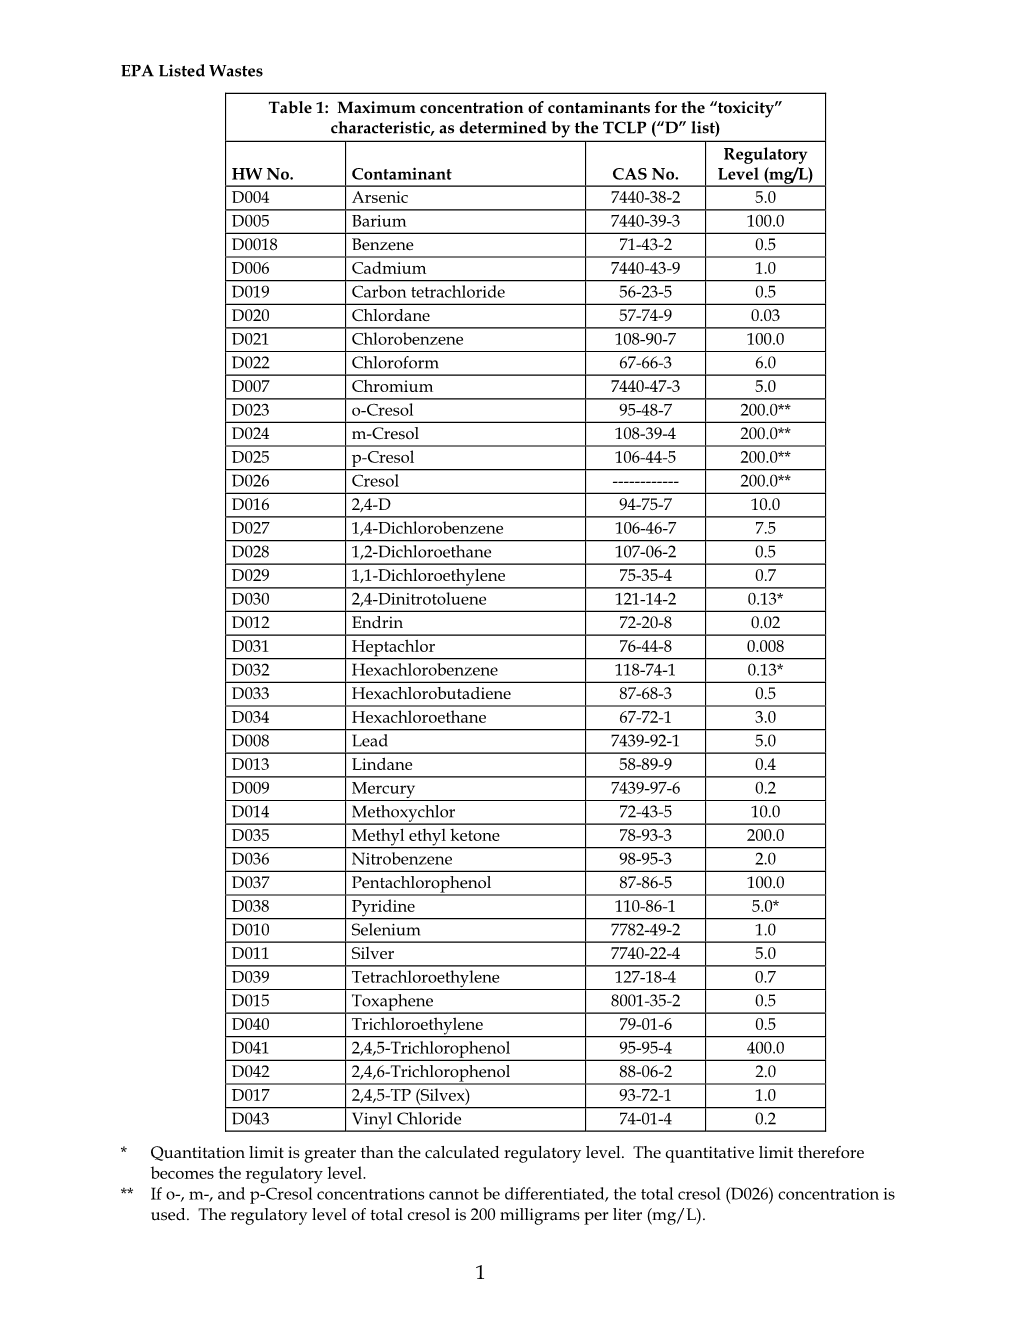 EPA Listed Wastes Table 1: Maximum Concentration of Contaminants For